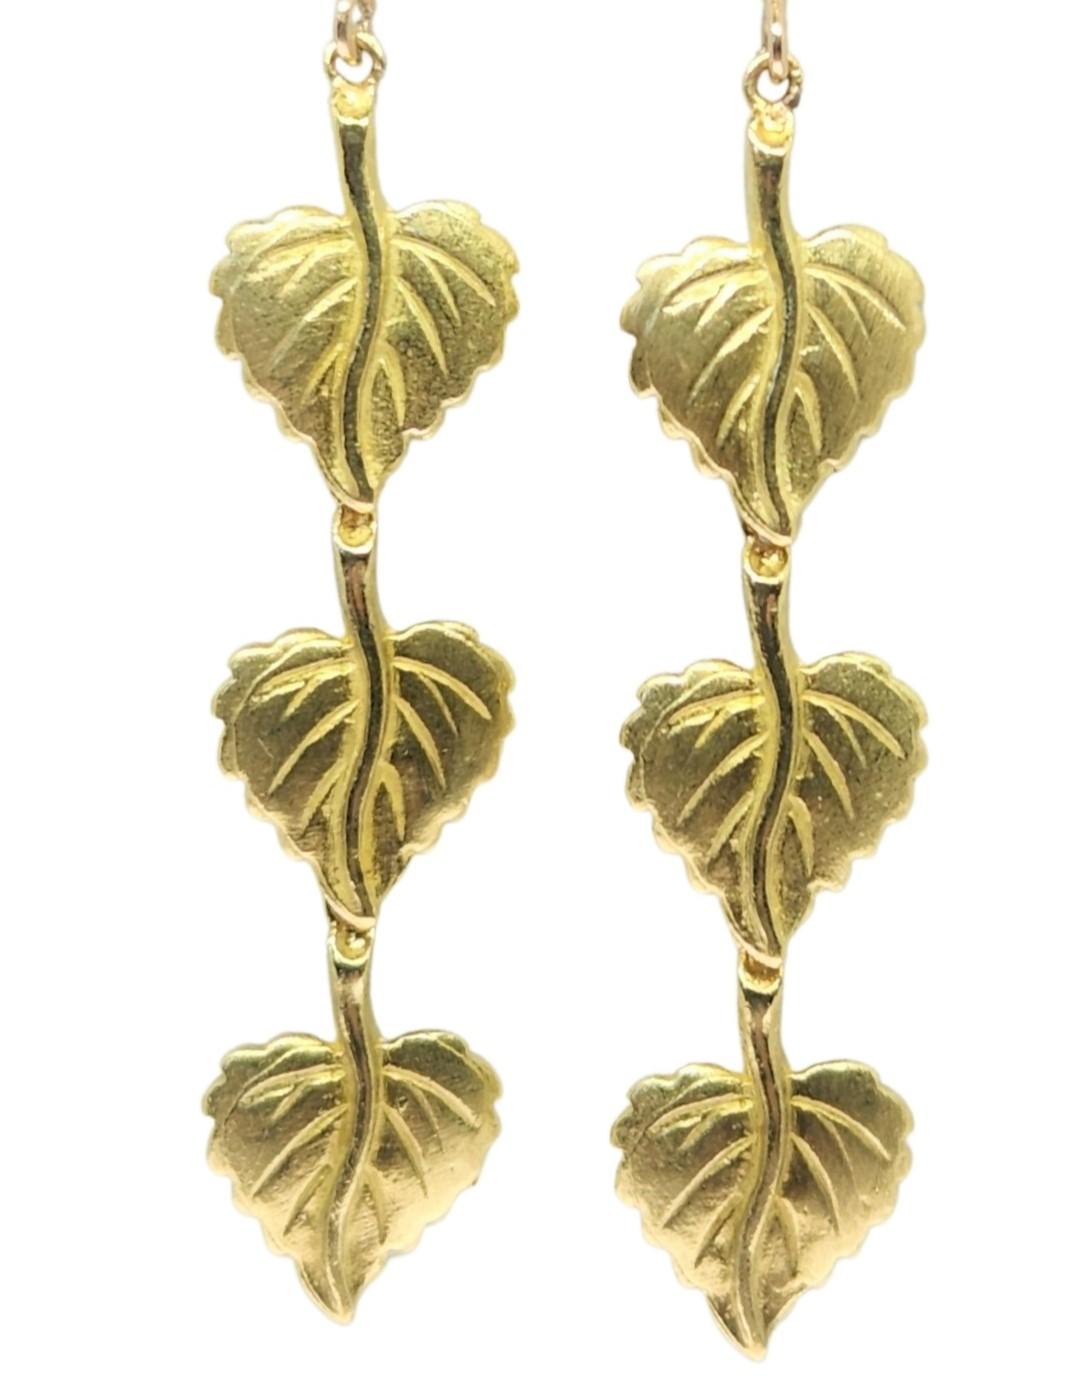 Contemporary Aspen Falling Leaves Articulated Drop Earrings in 18K Yellow Gold with Eurowires For Sale